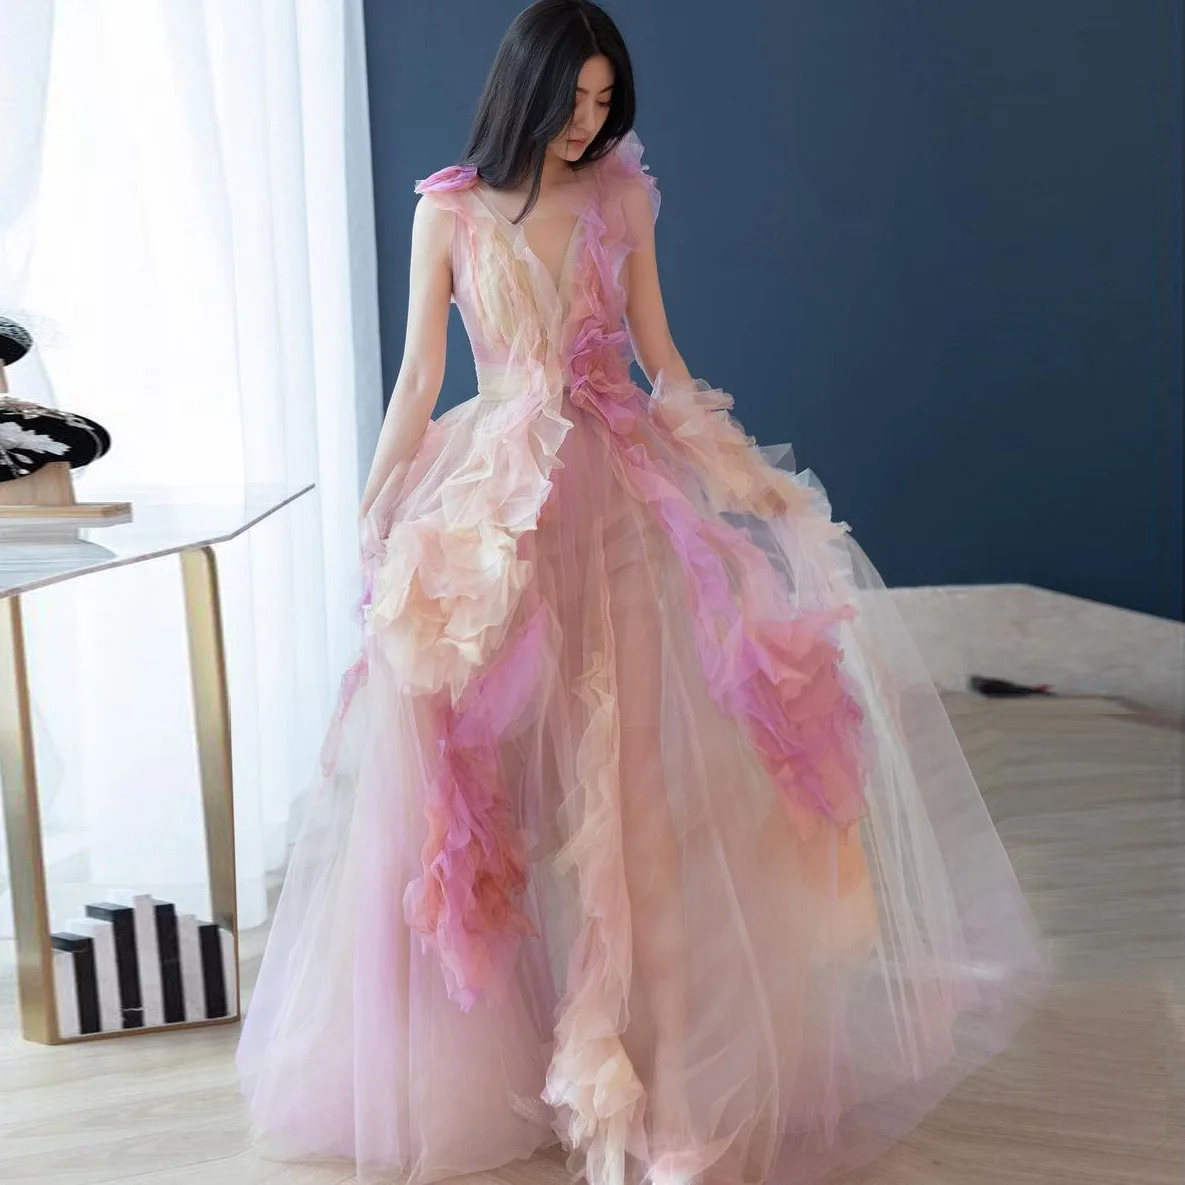 

Colorful Prom Dresses See- Through V-Neck Layered Ruffle Tulle Flowers Ball Gown Pageant Gowns Glamorous Brithday Dress